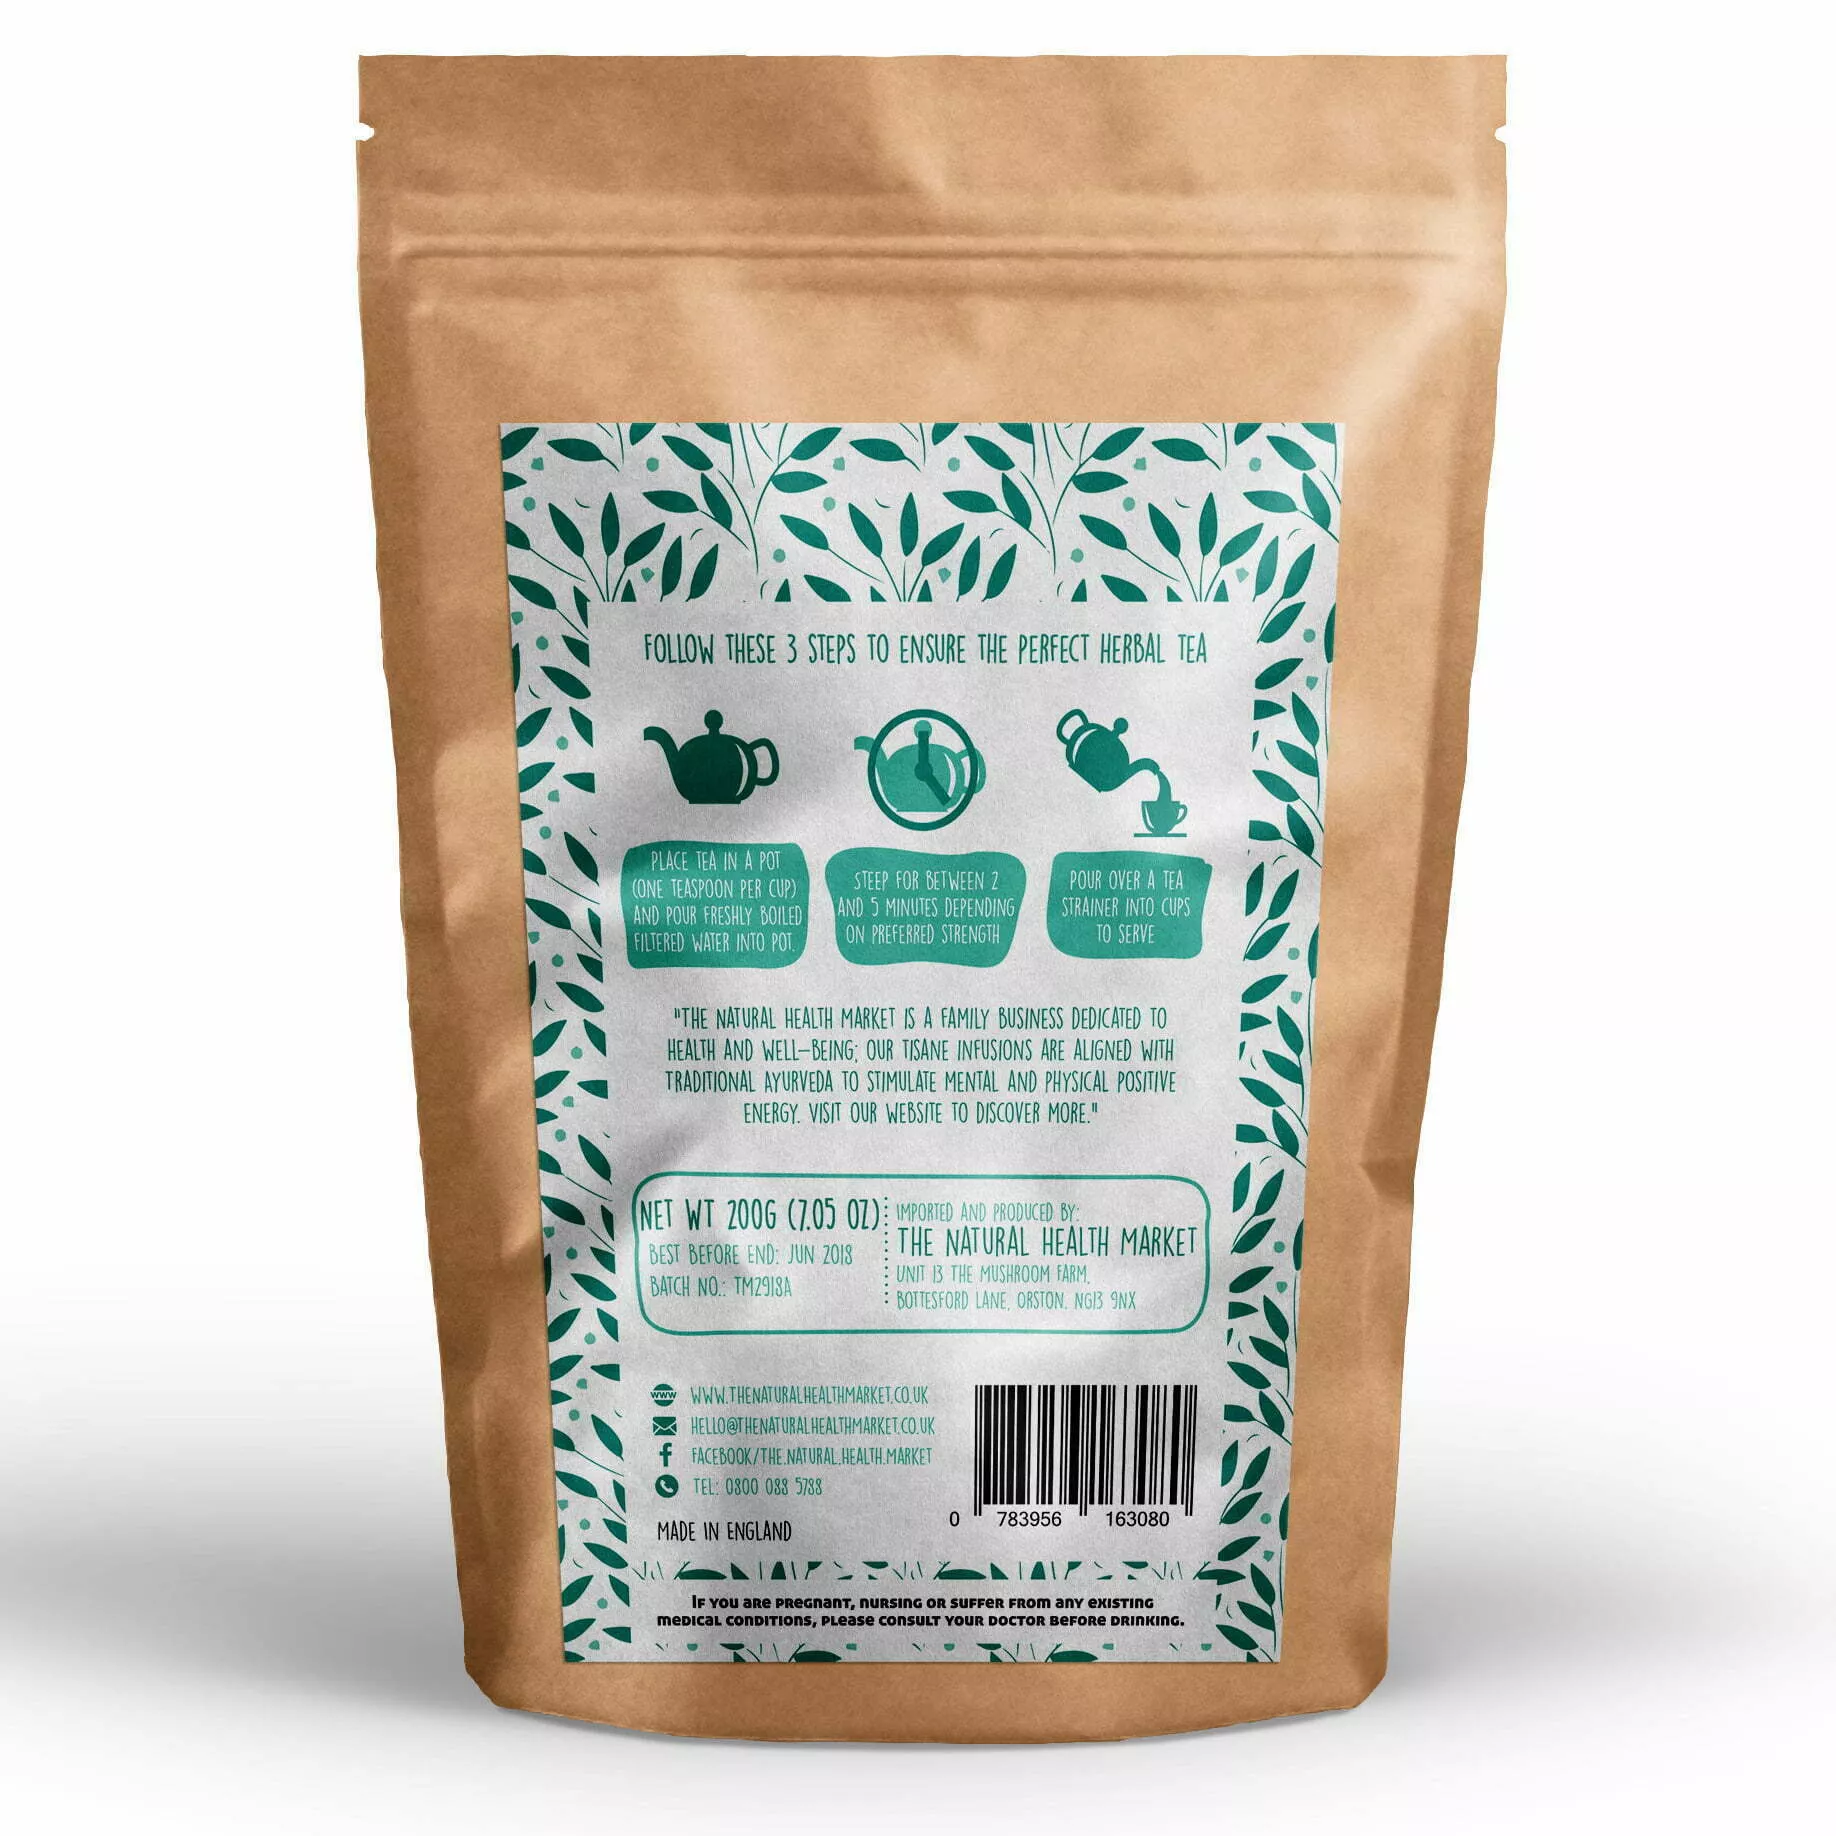 Peppermint tea - Loose Leaf Herbal Tea by The Natural Health Market. 200g pack.